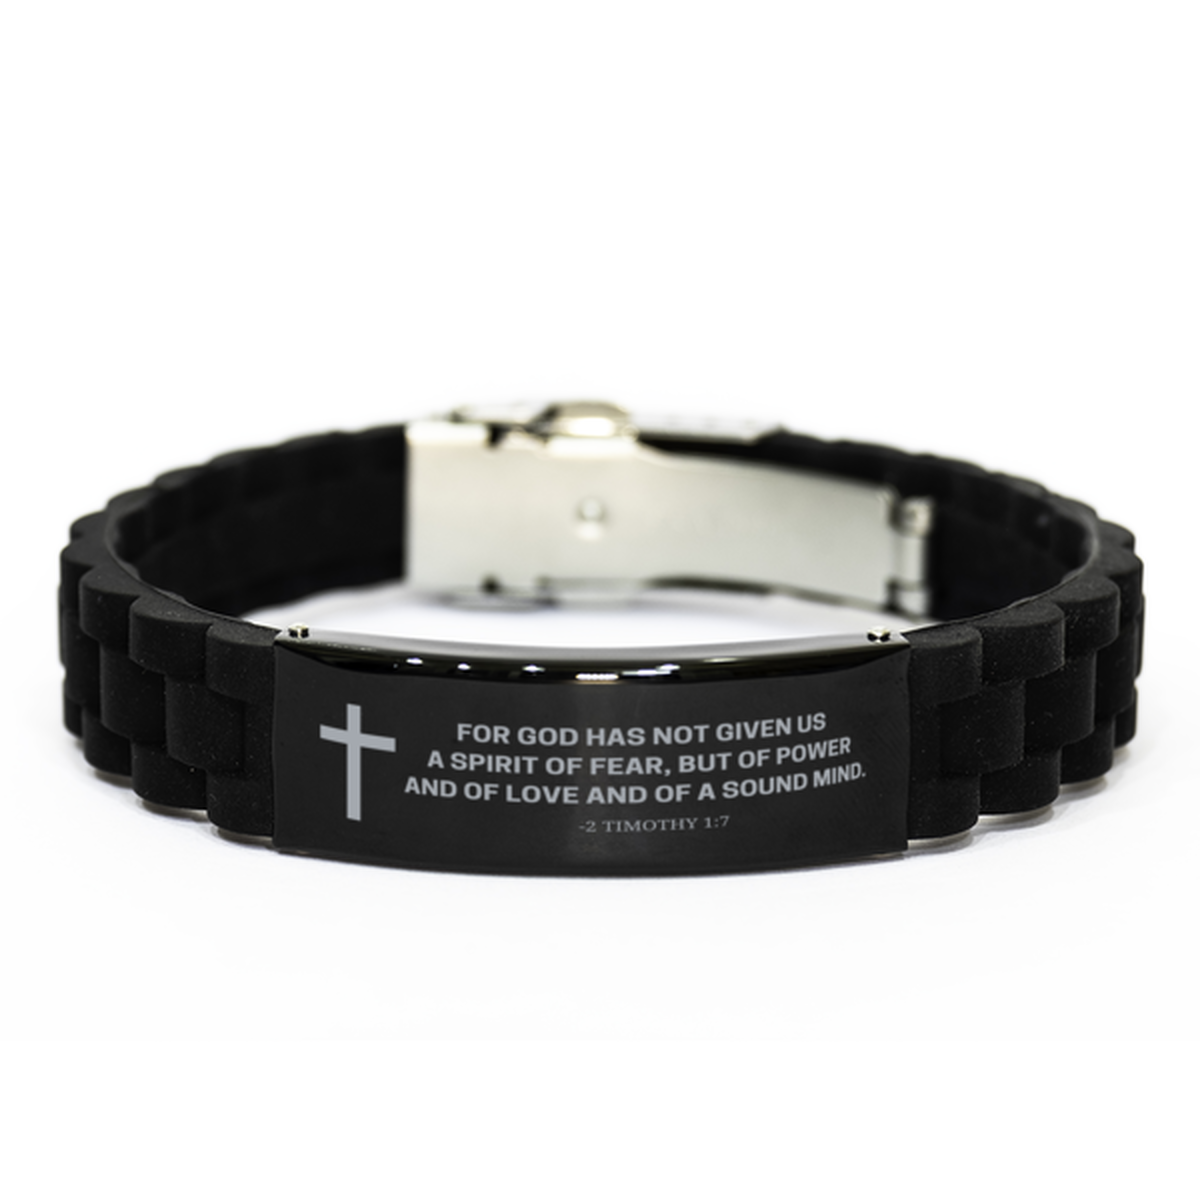 Baptism Gifts For Teenage Boys Girls, Christian Bible Verse Black Glidelock Clasp Bracelet, For God has not given us, Catholic Confirmation Gifts for Son, Godson, Grandson, Nephew